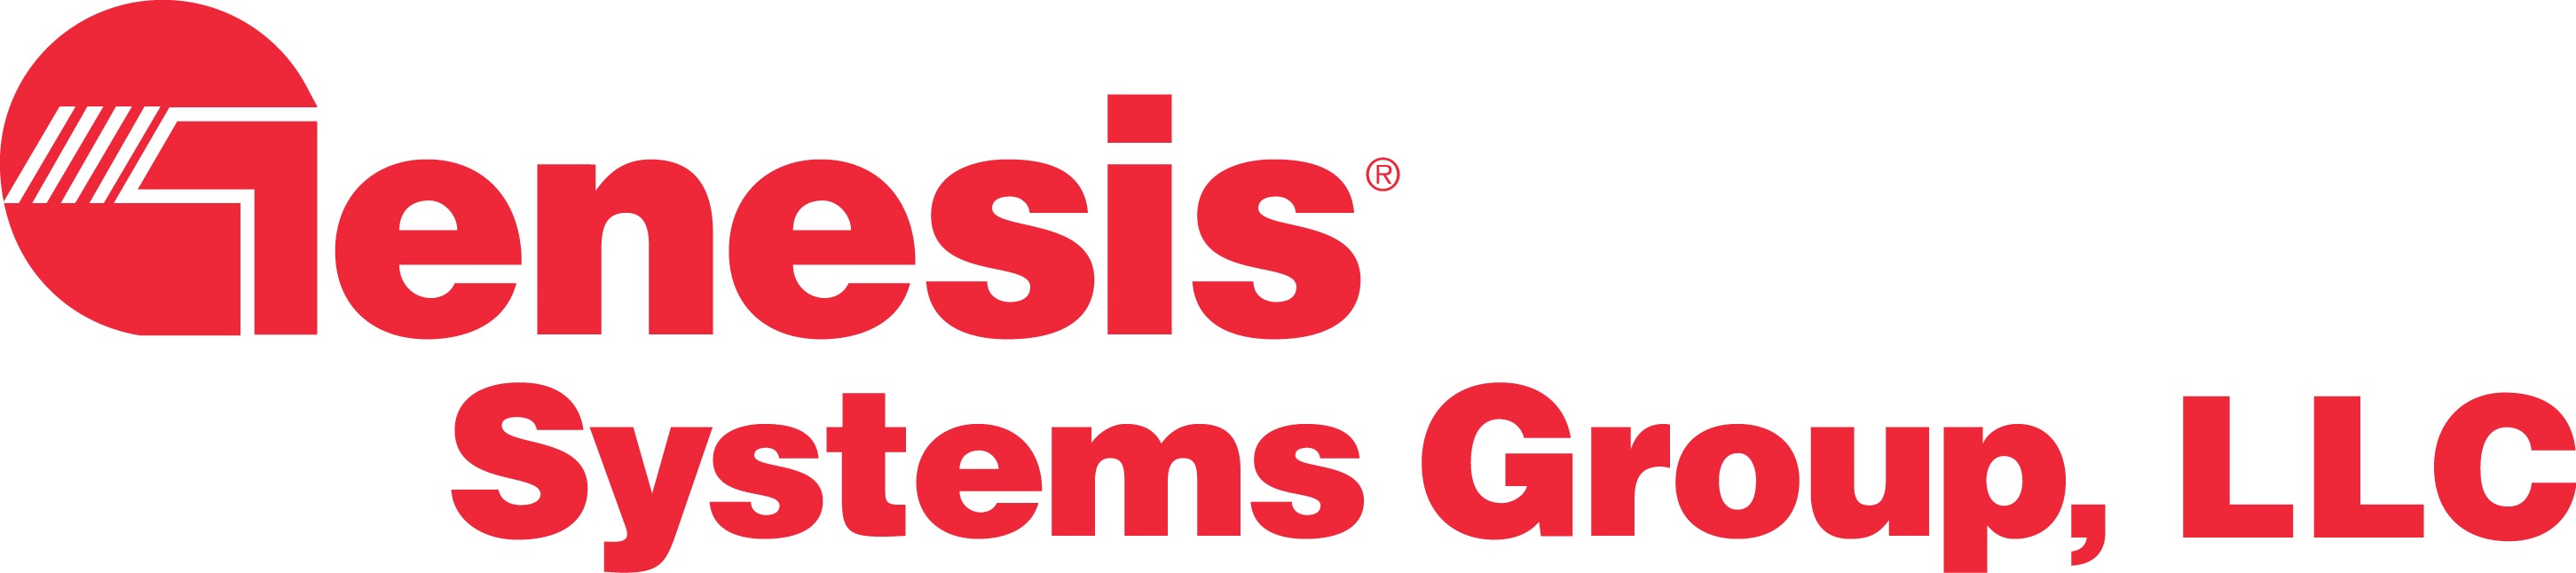 Genesis Systems Group - Robotic Integration & Robotic Welding Experts www.genesis-systems.com